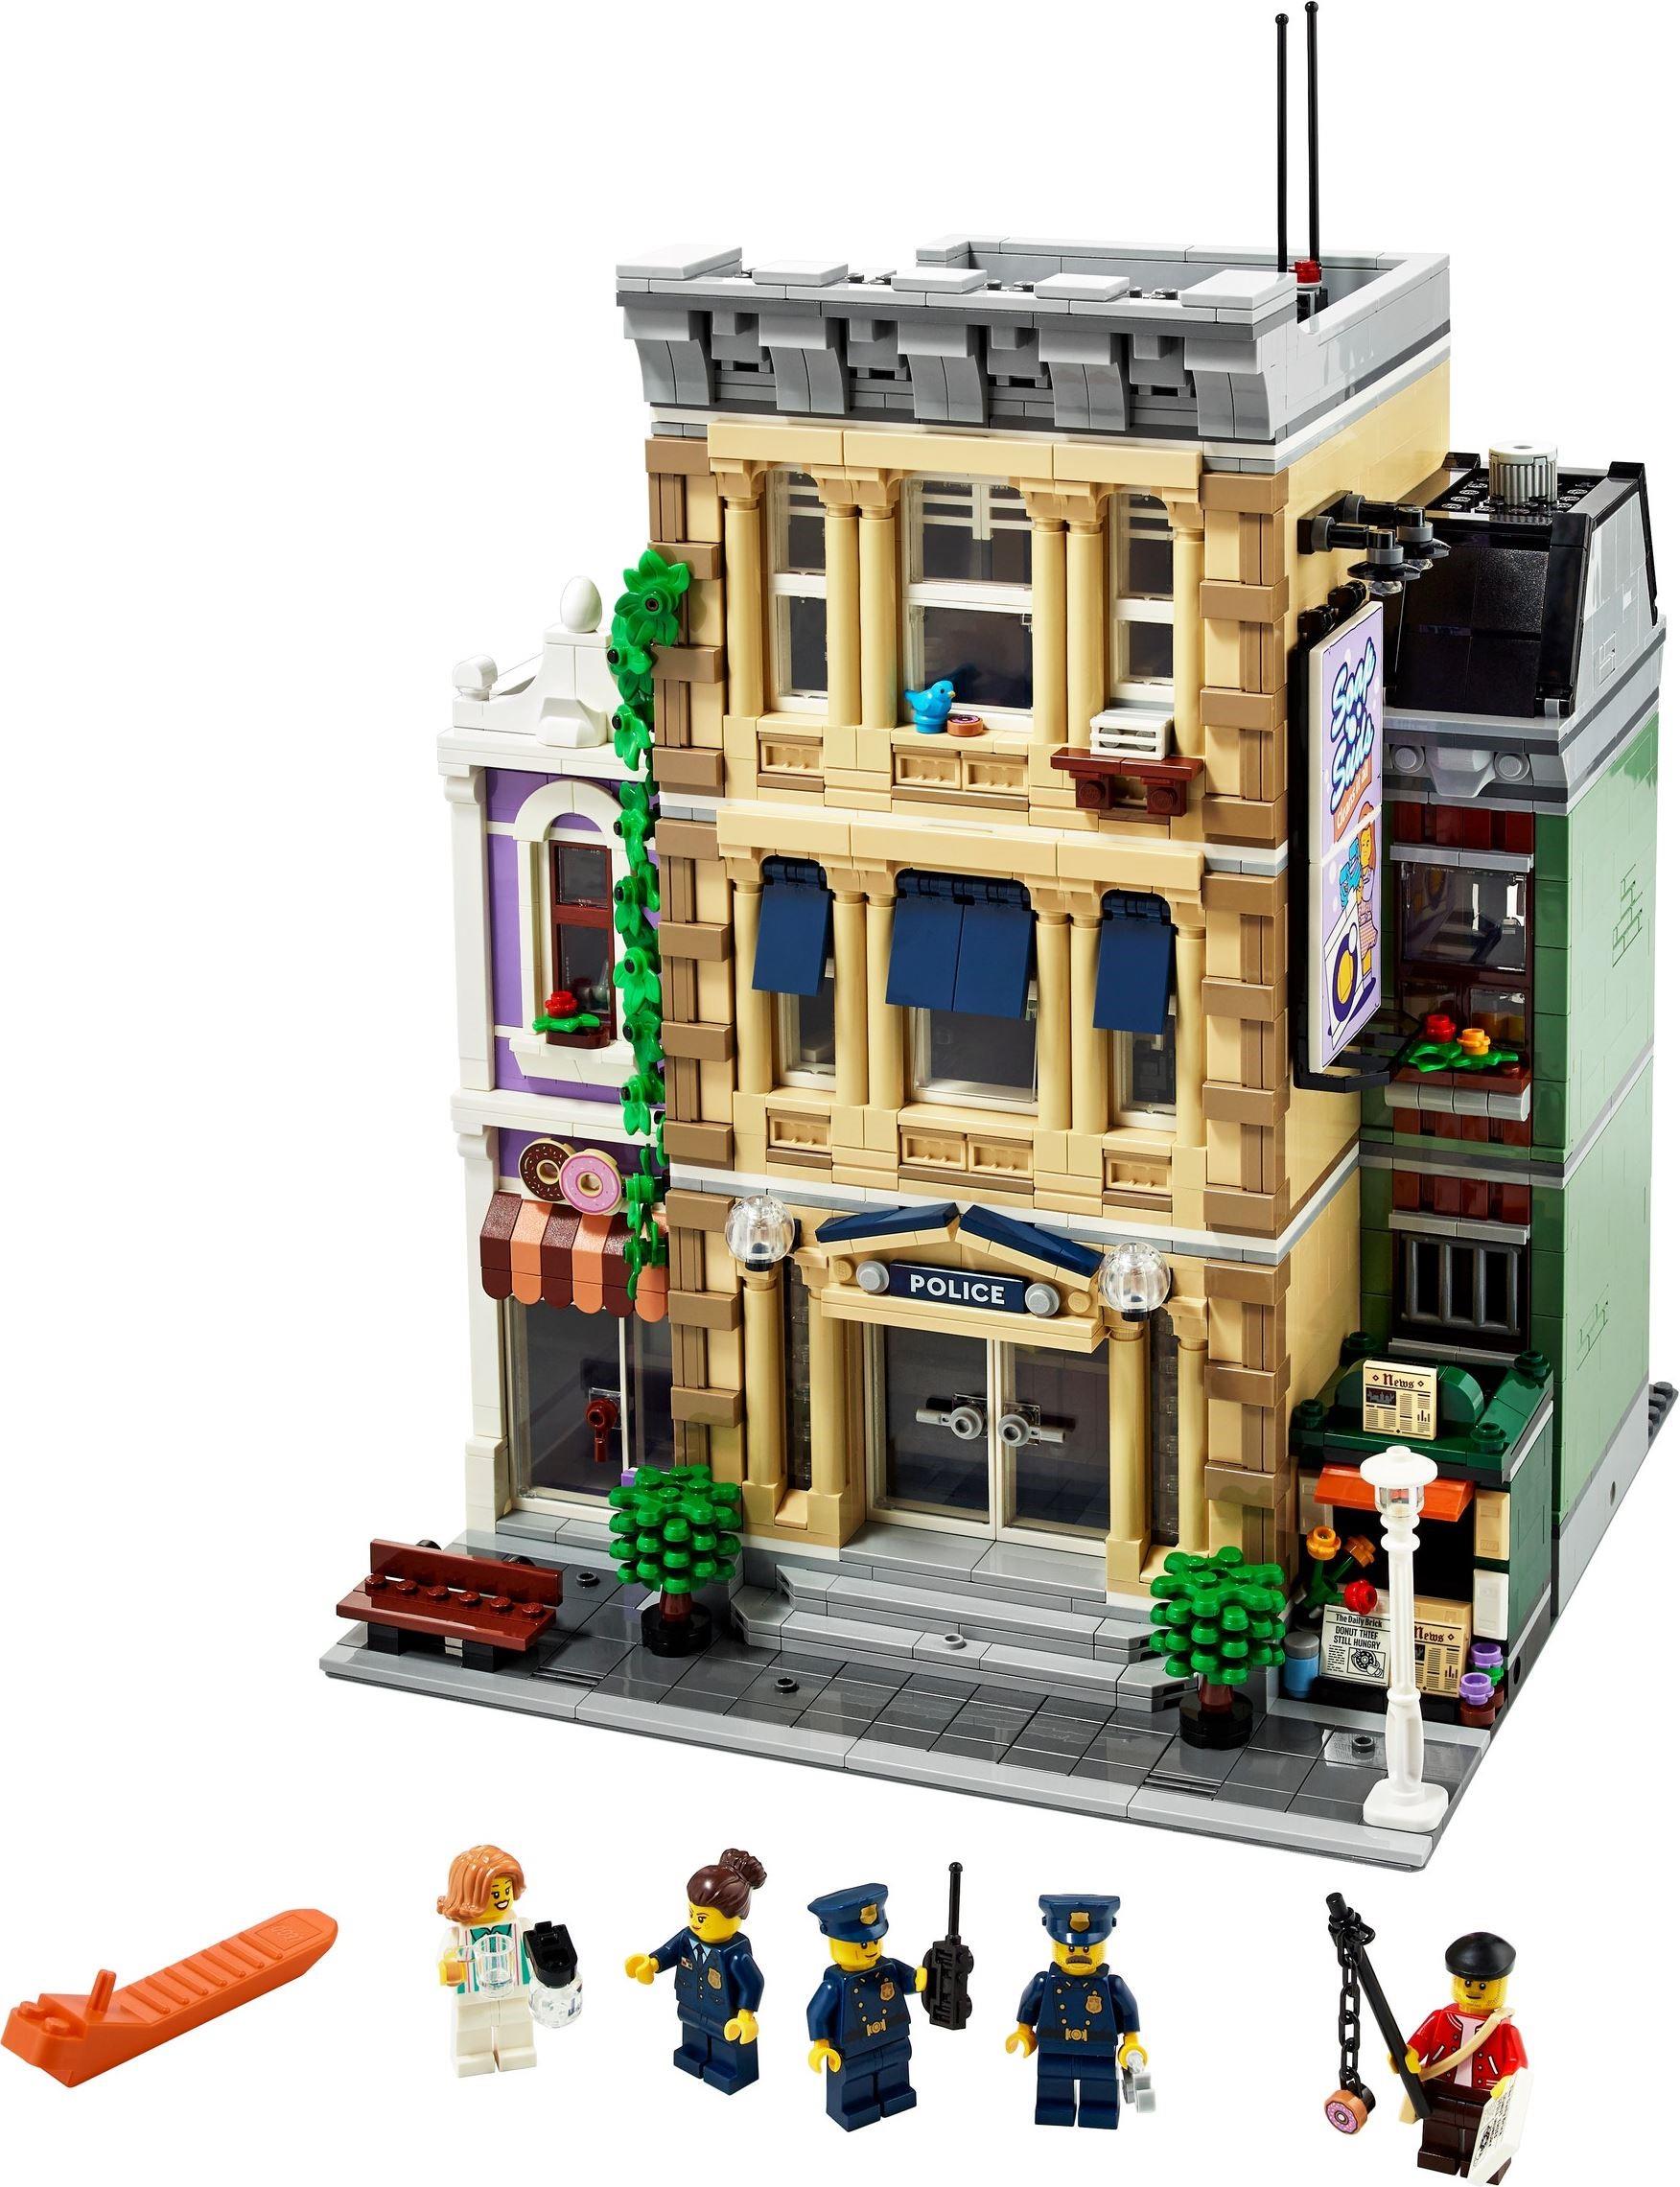 Lego police stations we wish we could buy